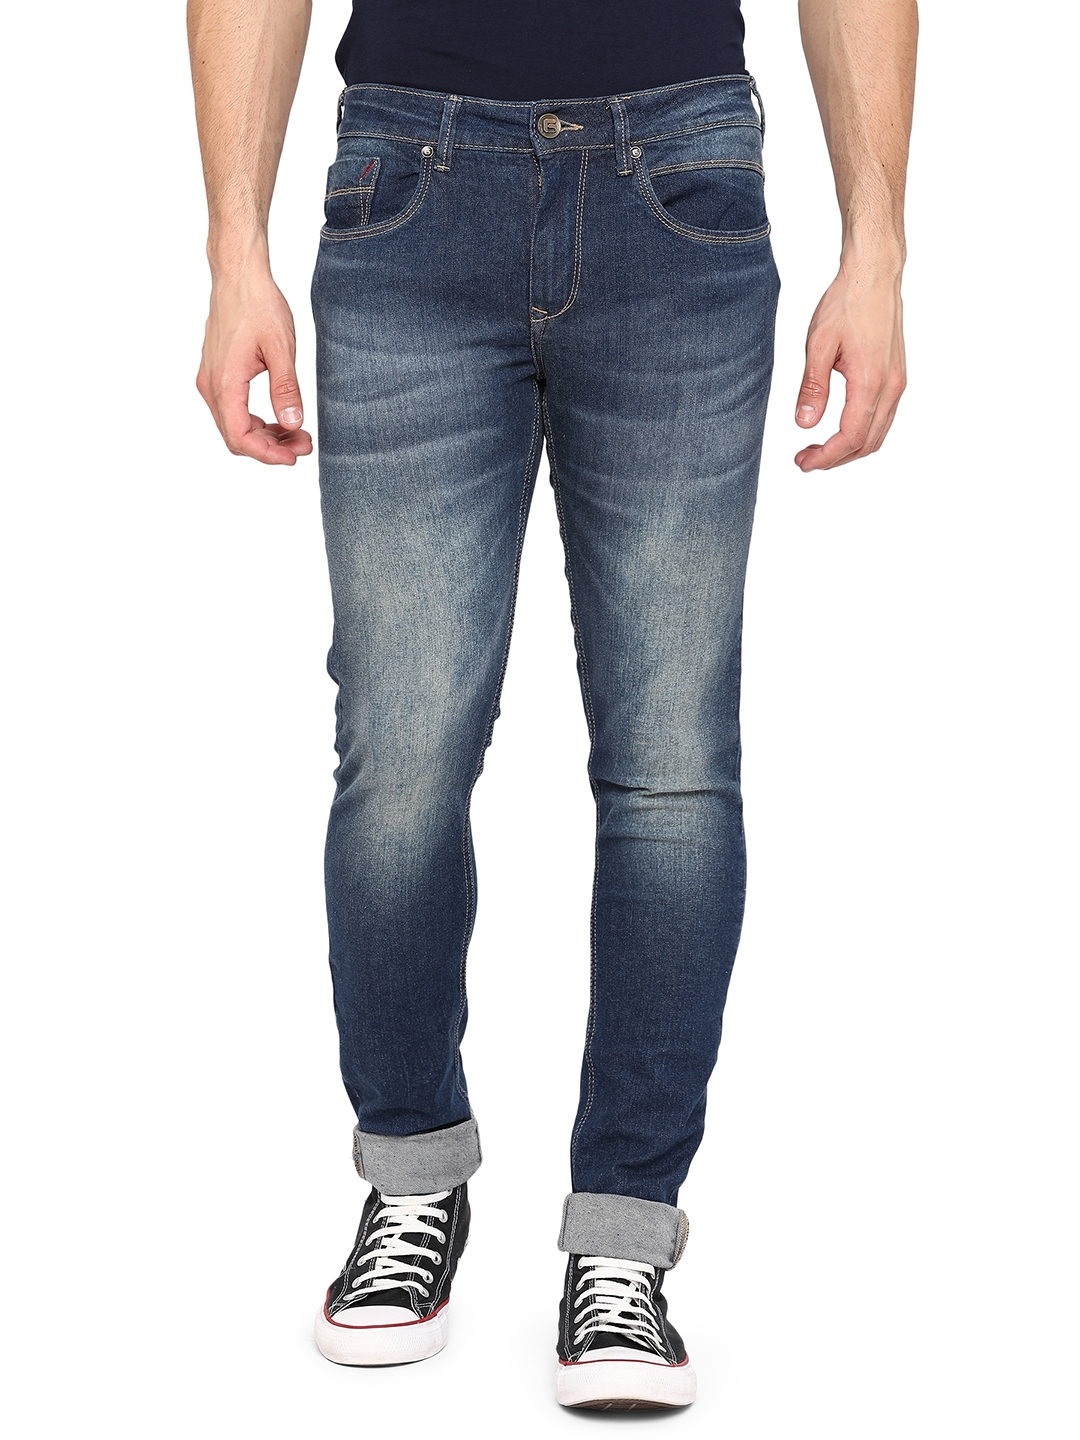 Greenfibre | Mid Blue Washed Narrow Fit Jeans | Greenfibre